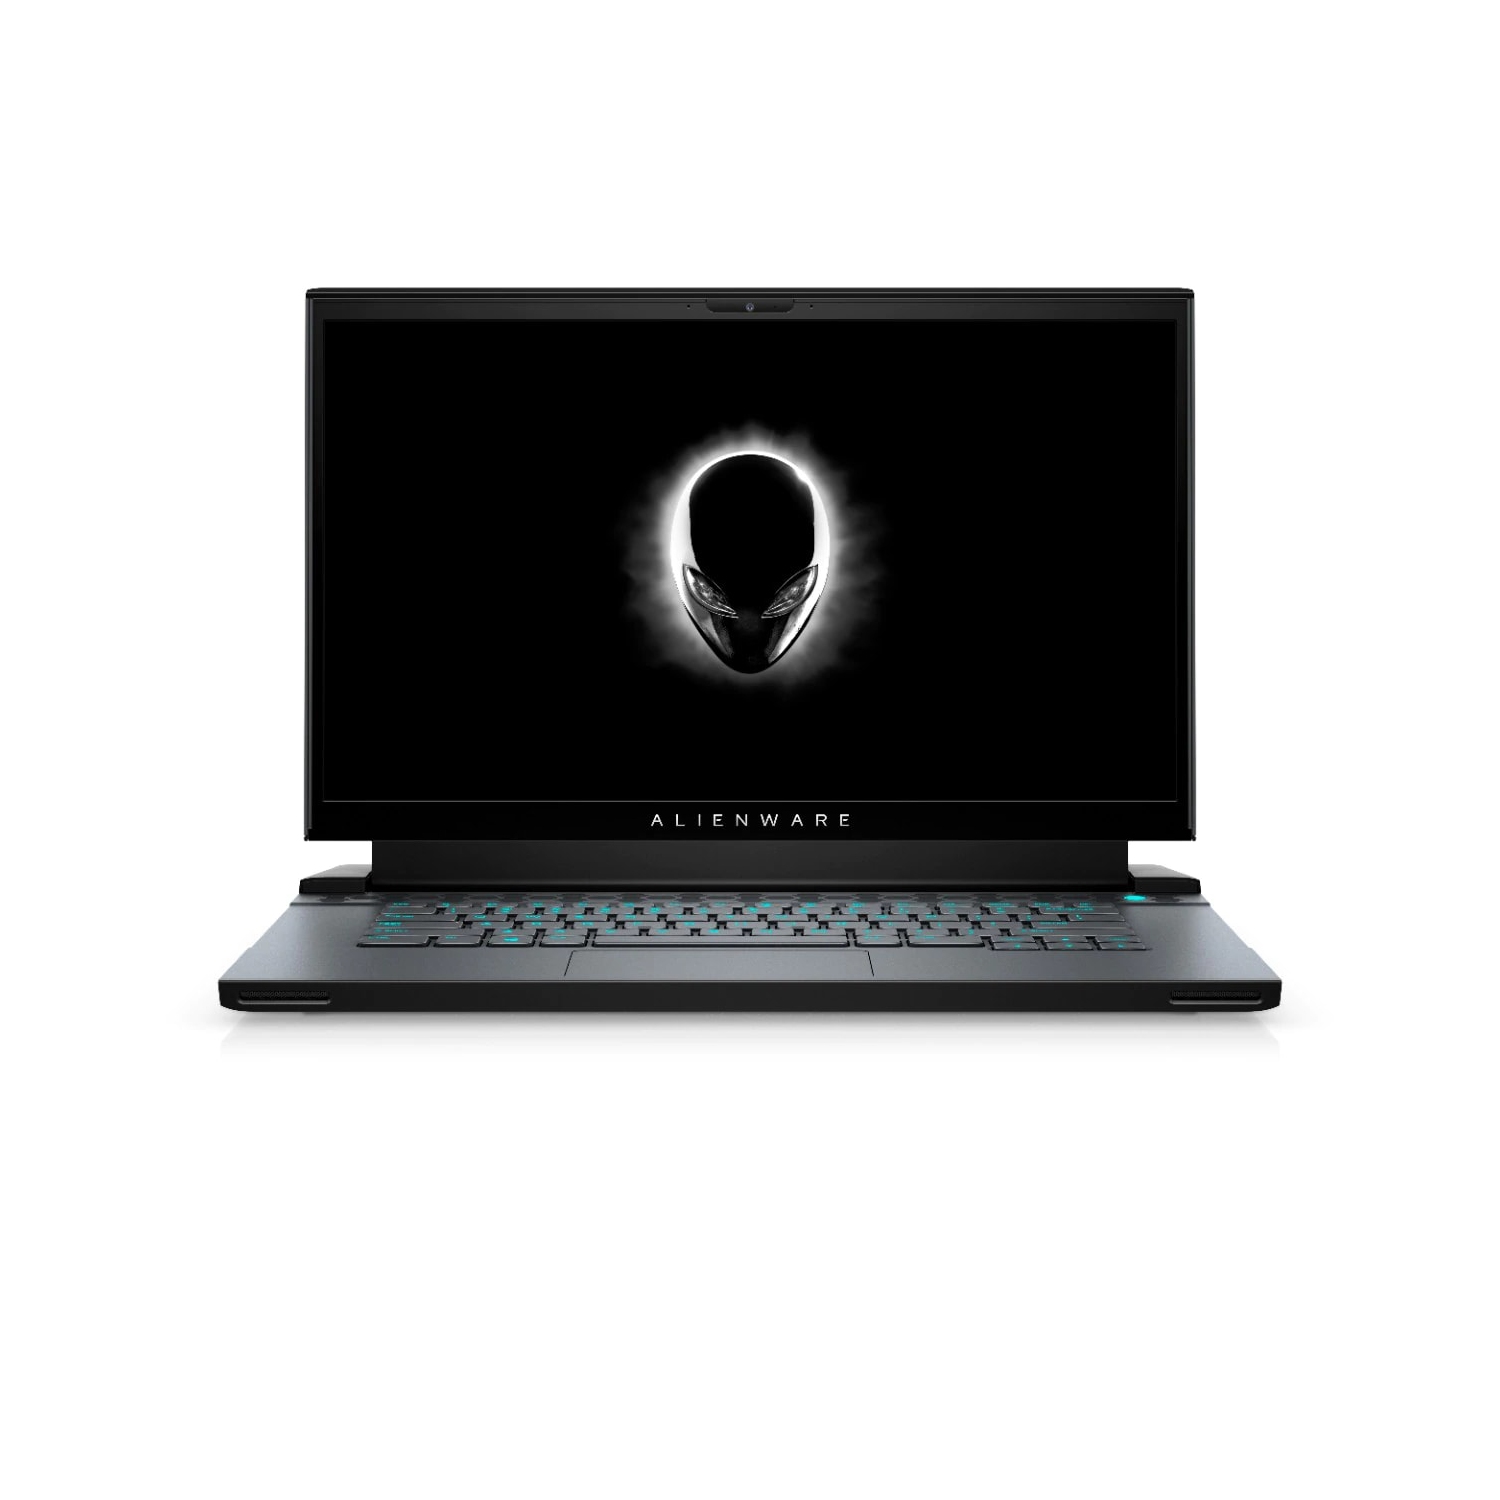 Refurbished (Excellent) - Dell Alienware m15 R4 Gaming Laptop (2021), 15.6" FHD, Core i7, 256GB SSD, 16GB RAM, RTX 3070, 8 Cores @ 5 GHz, 10th Gen CPU Certified